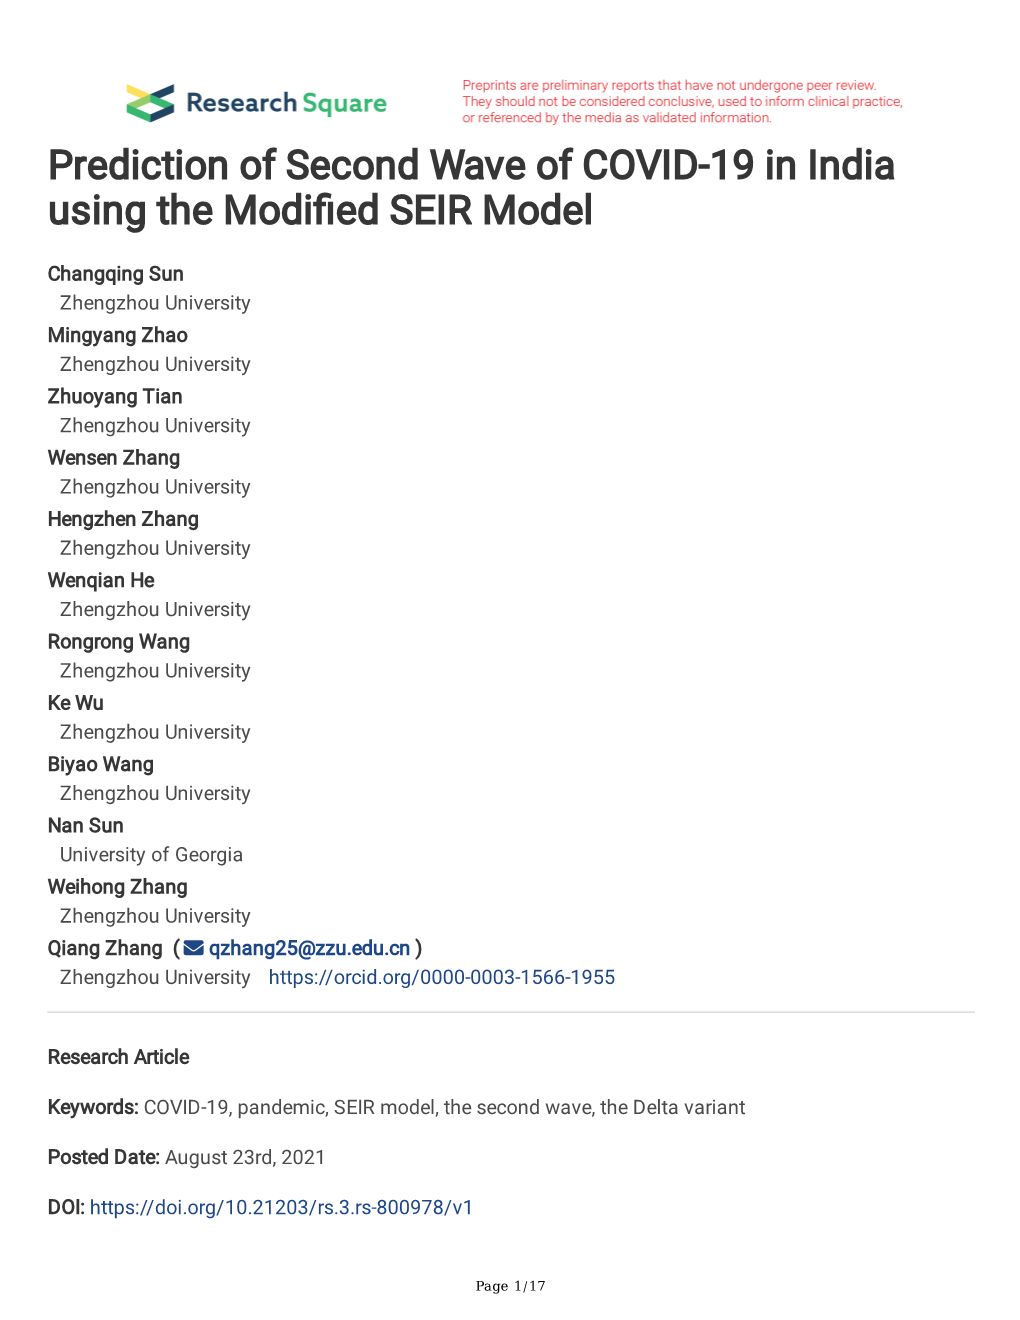 Prediction of Second Wave of COVID-19 in India Using the Modifed SEIR Model